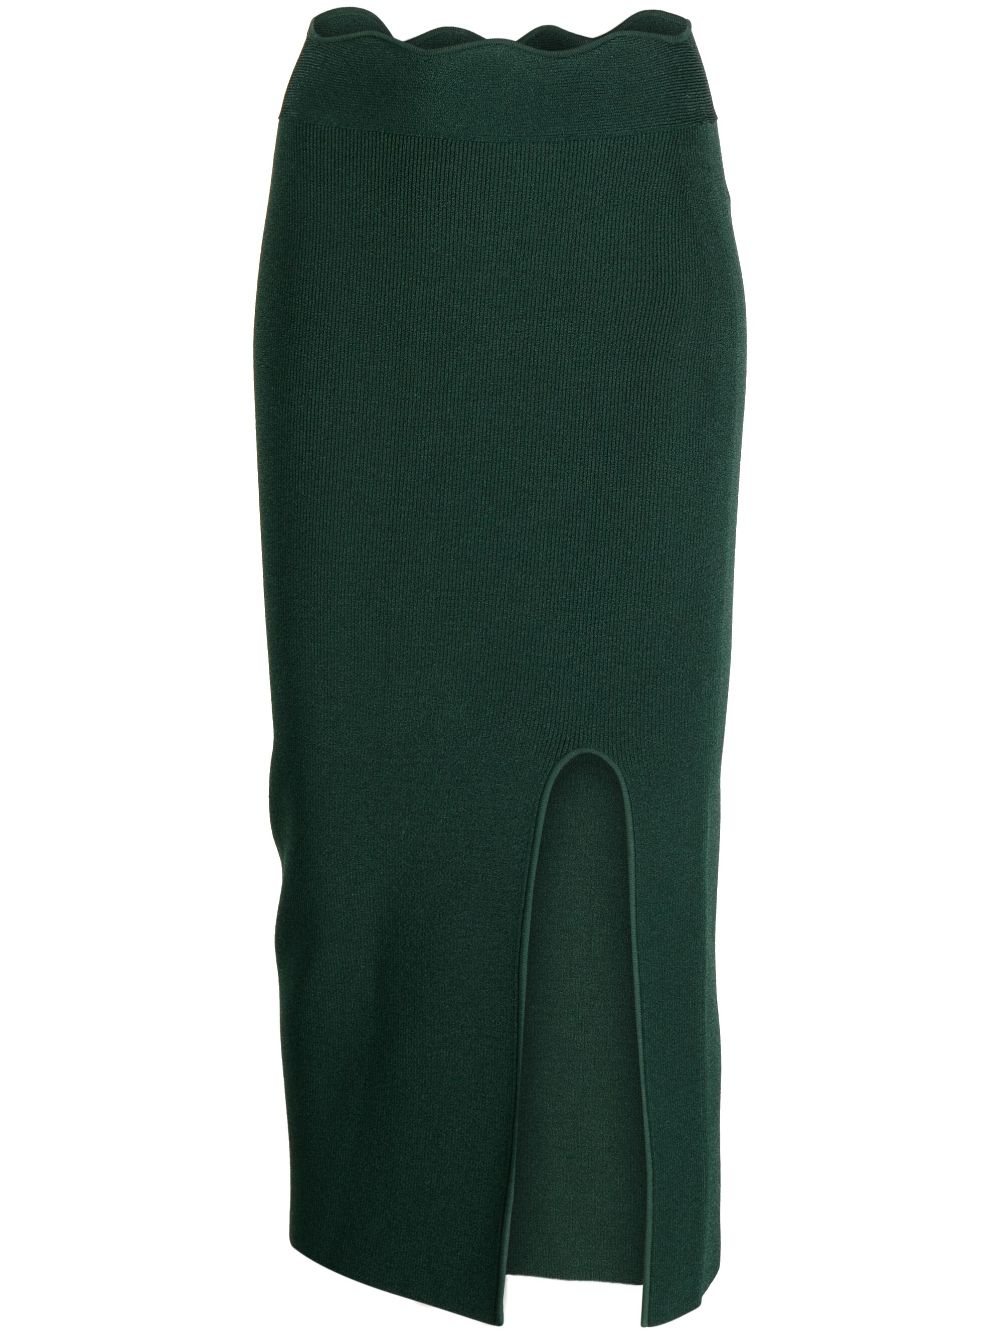 Delia knitted pencil skirt